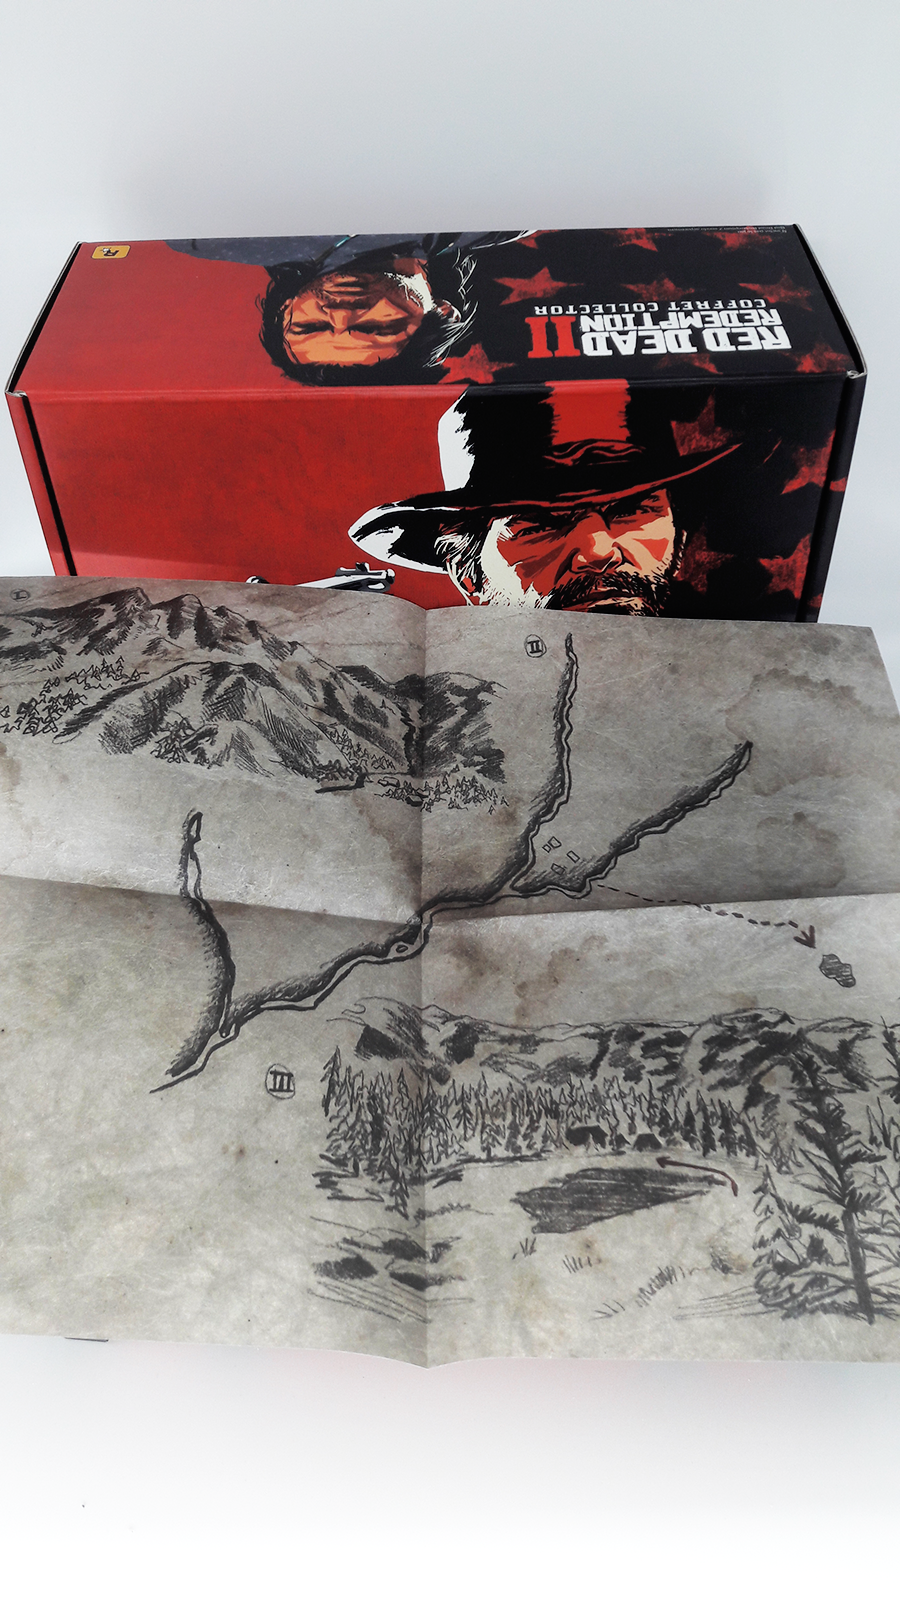 Red Dead Redemption 2 collector